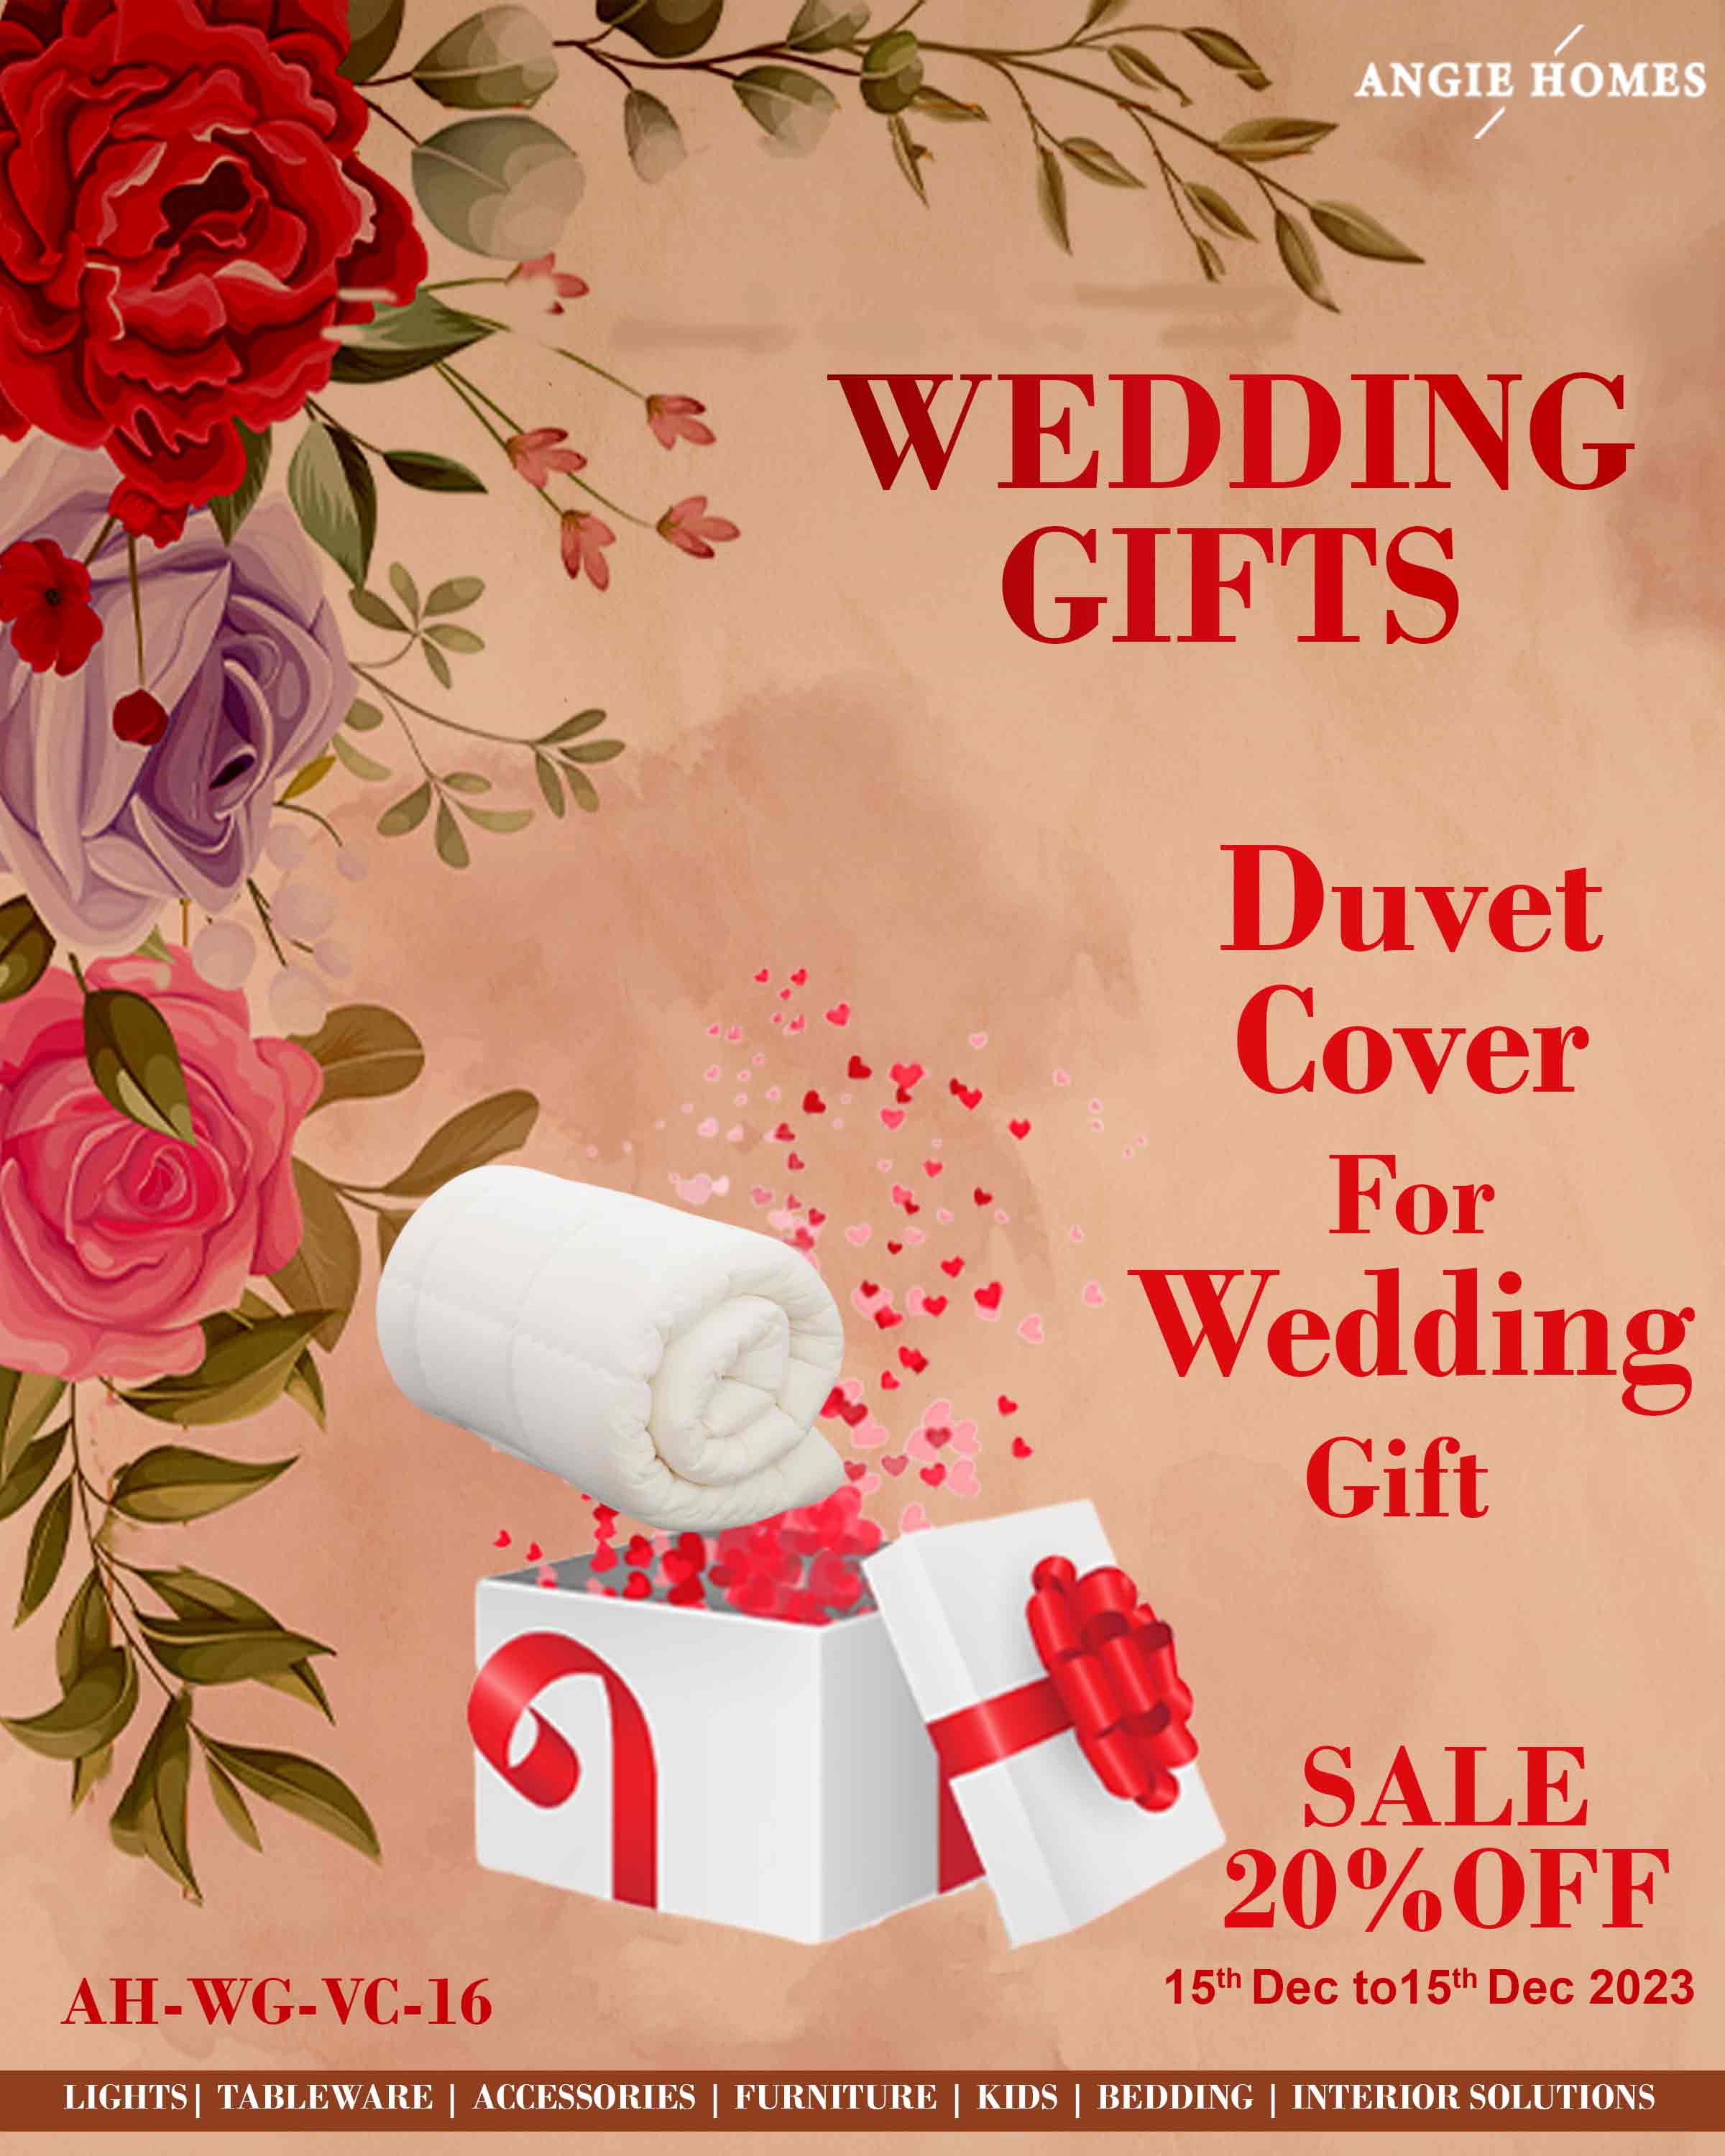 30 Wedding Gifts For Couples,wedding gift ideas for bride and groom,#gift# wedding#freind#couple - YouTube